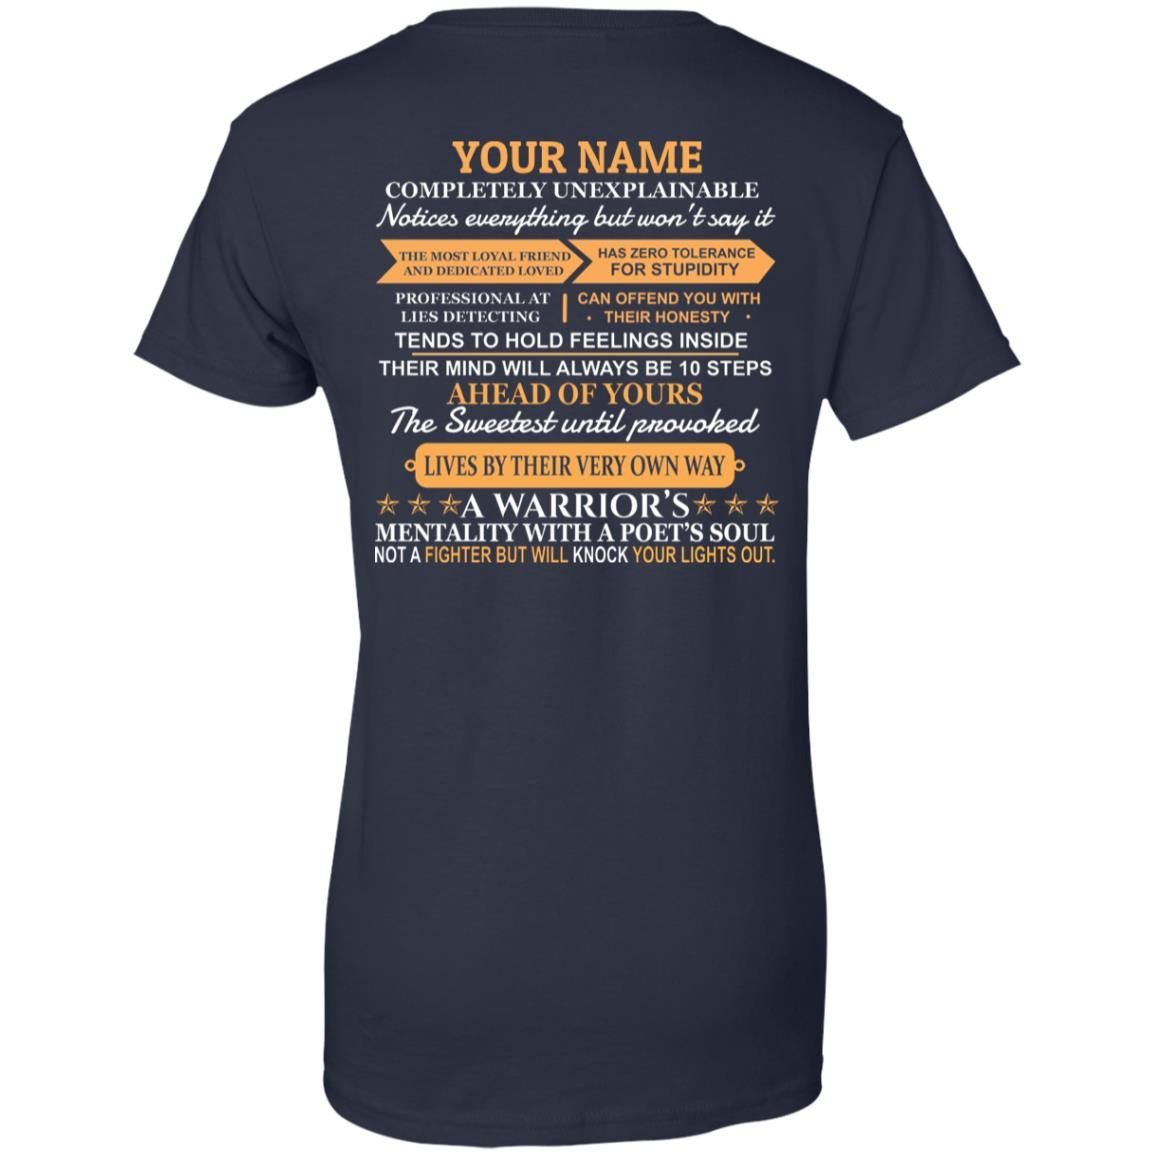 Custom name completely unexplainable notices everything but won’t say it shirt 4